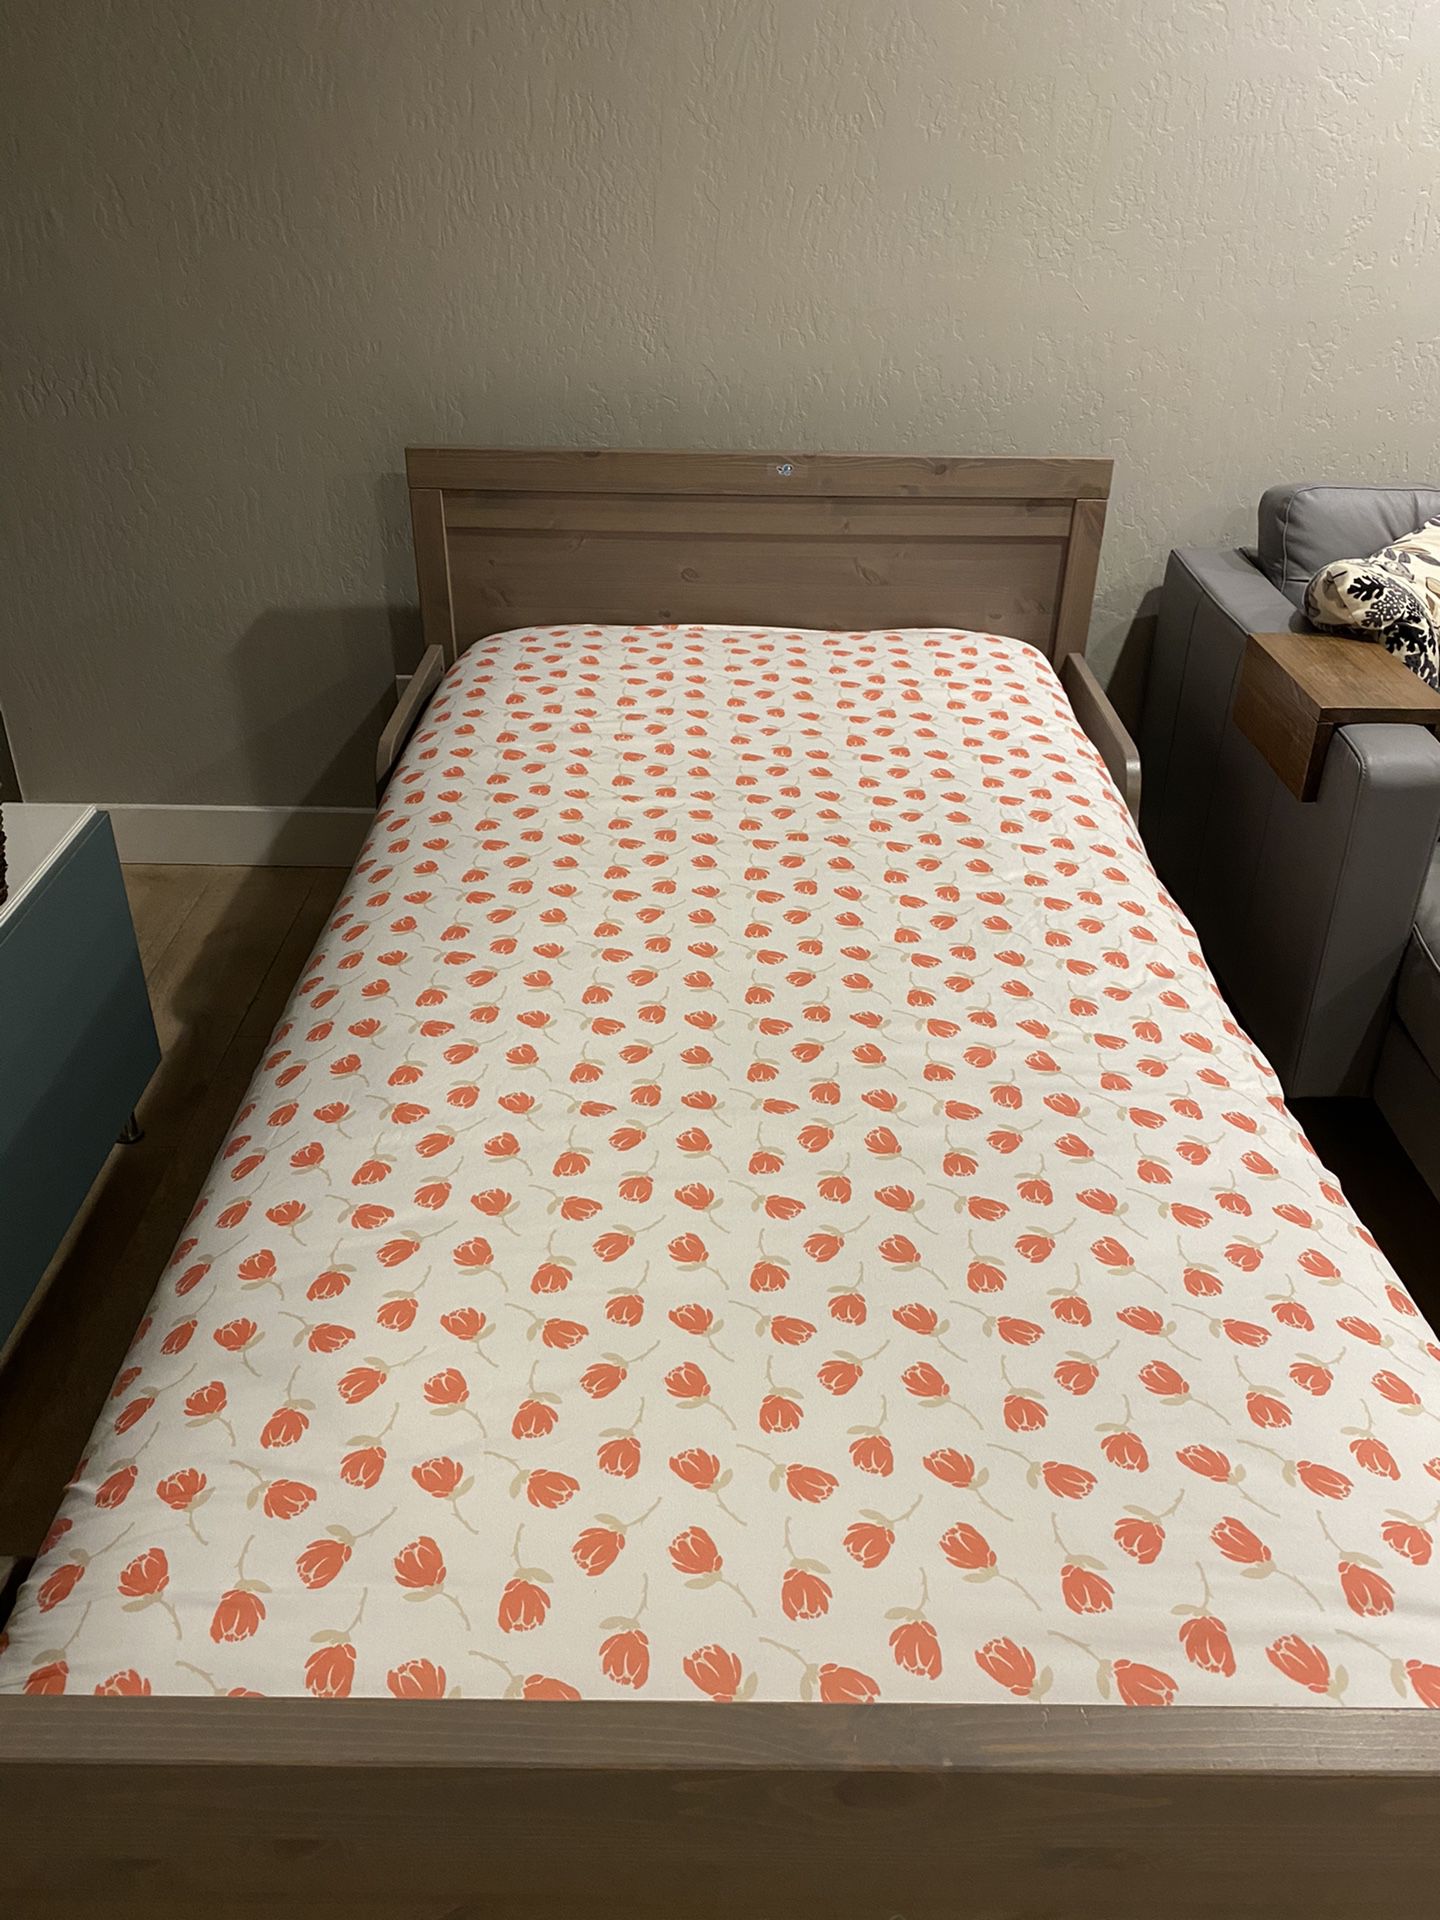 Ikea solid wood twin bed with mattress